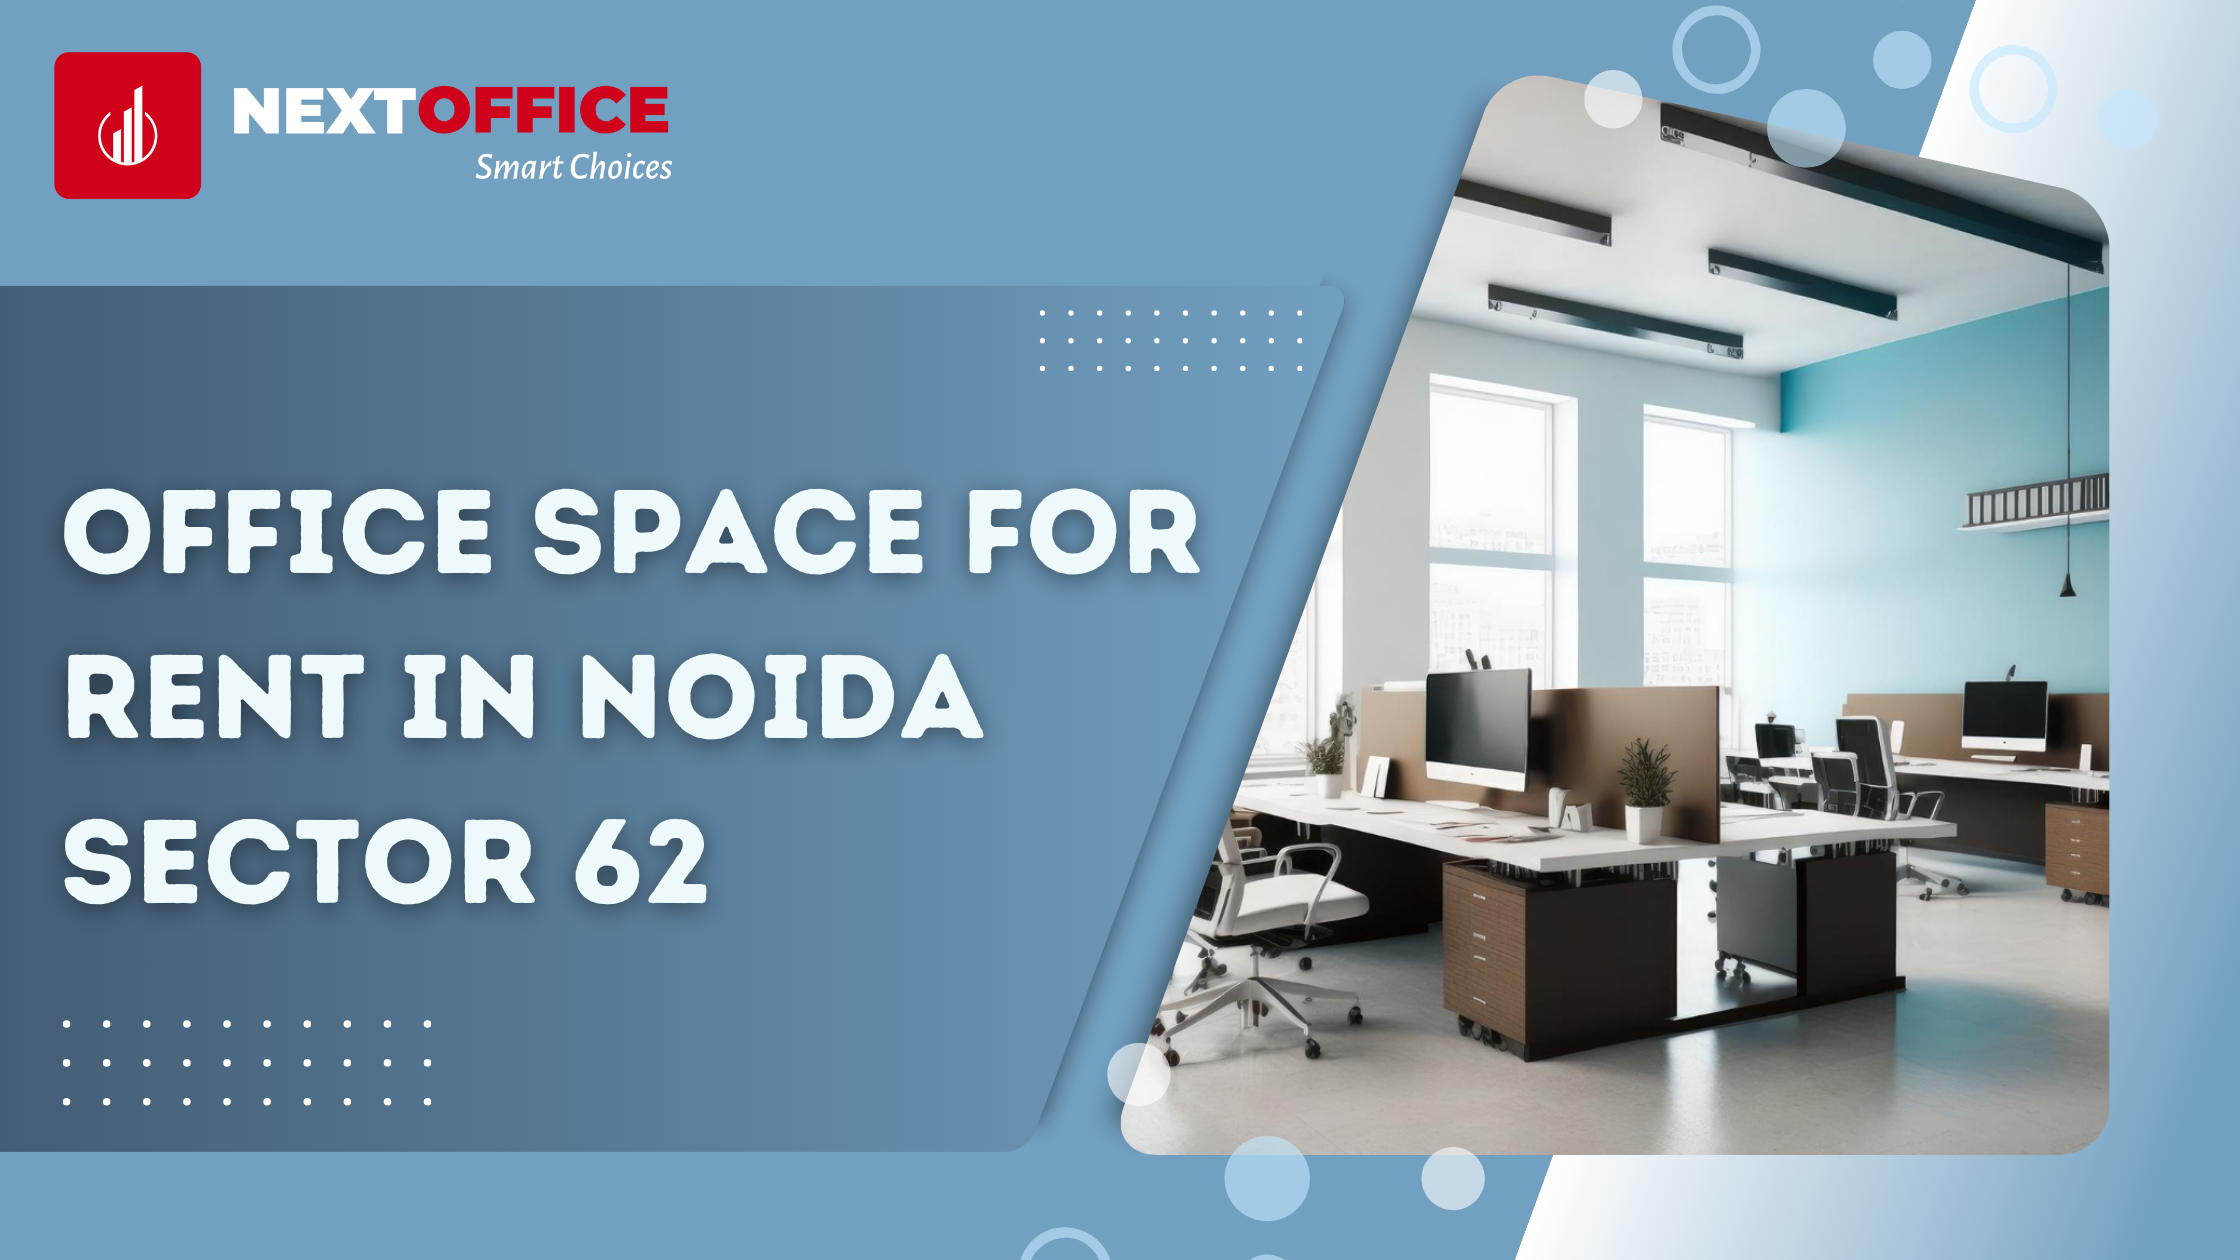 Office Space For Rent in Noida Sector 62